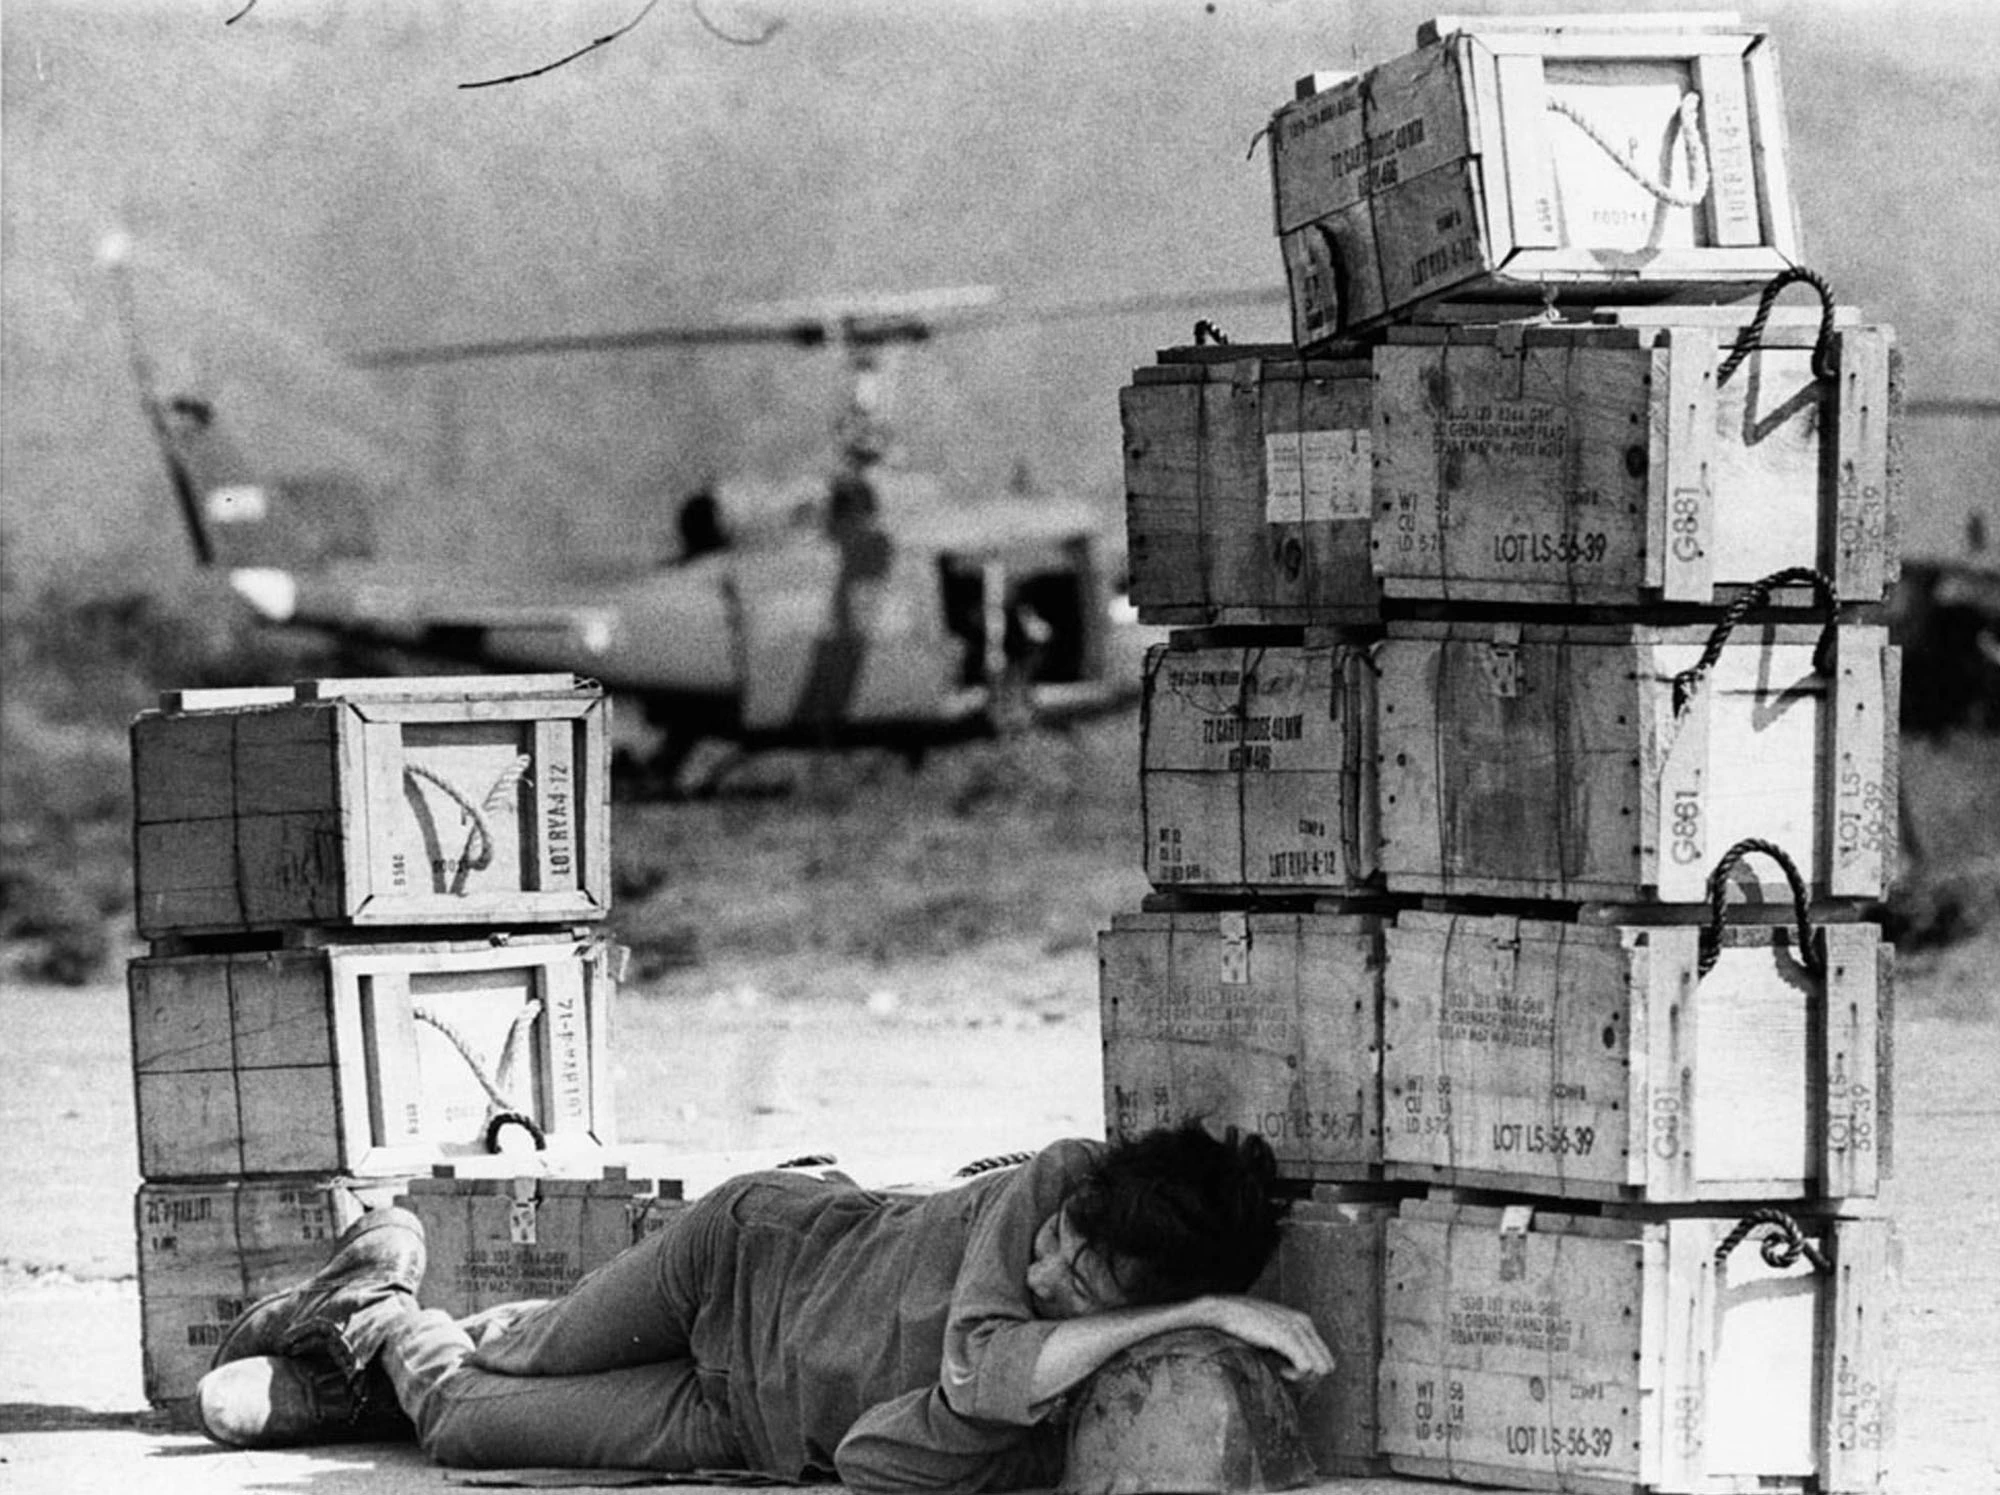 Resting Soldier, Ammunition Boxes, Black and White, Military Helicopter, Military Base, Landing Zone, Soldier Fatigue, War Conditions, Resupply Operation, Field Operations, War Photography, Soldier's Vulnerability, Moment of Rest, Combat Environment, Historical Military, Military Logistics, Warzone Fatigue, Soldier Respite, Conflict Snapshot